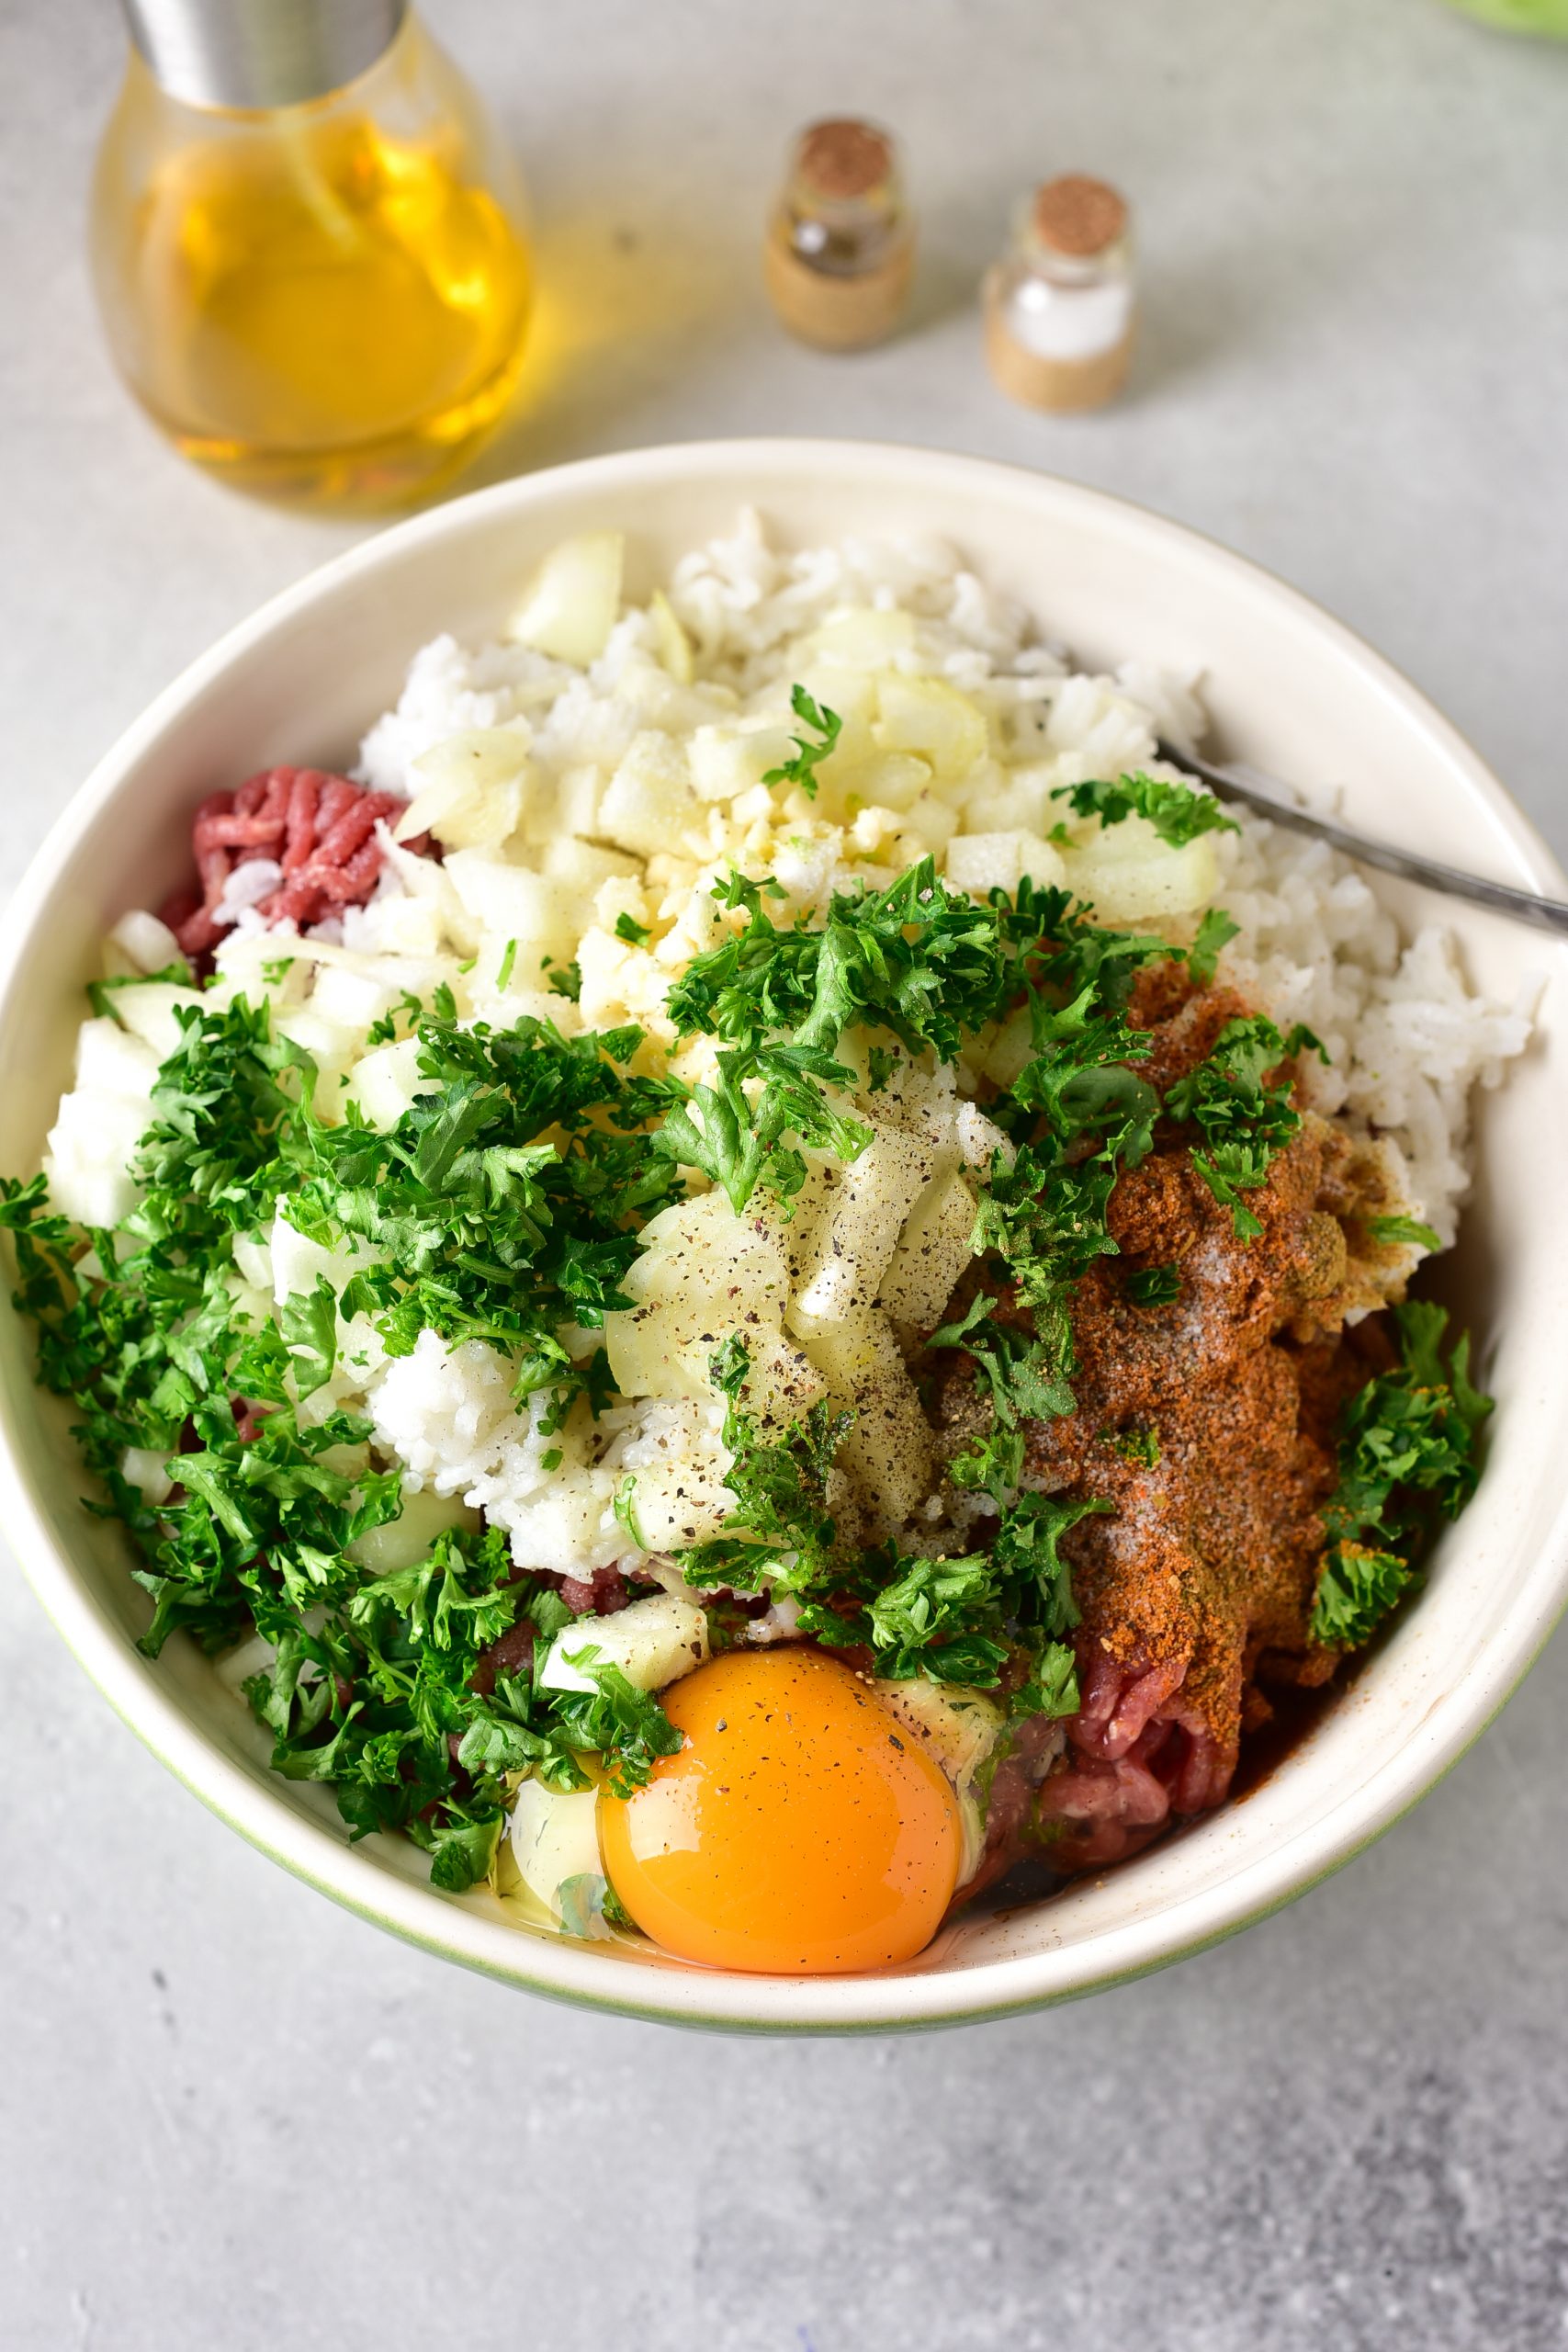 In a bowl, stir together the ground beef, eggs, cumin, Italian seasoning, white rice, ½ cup onion, parsley, and salt and pepper to taste. 